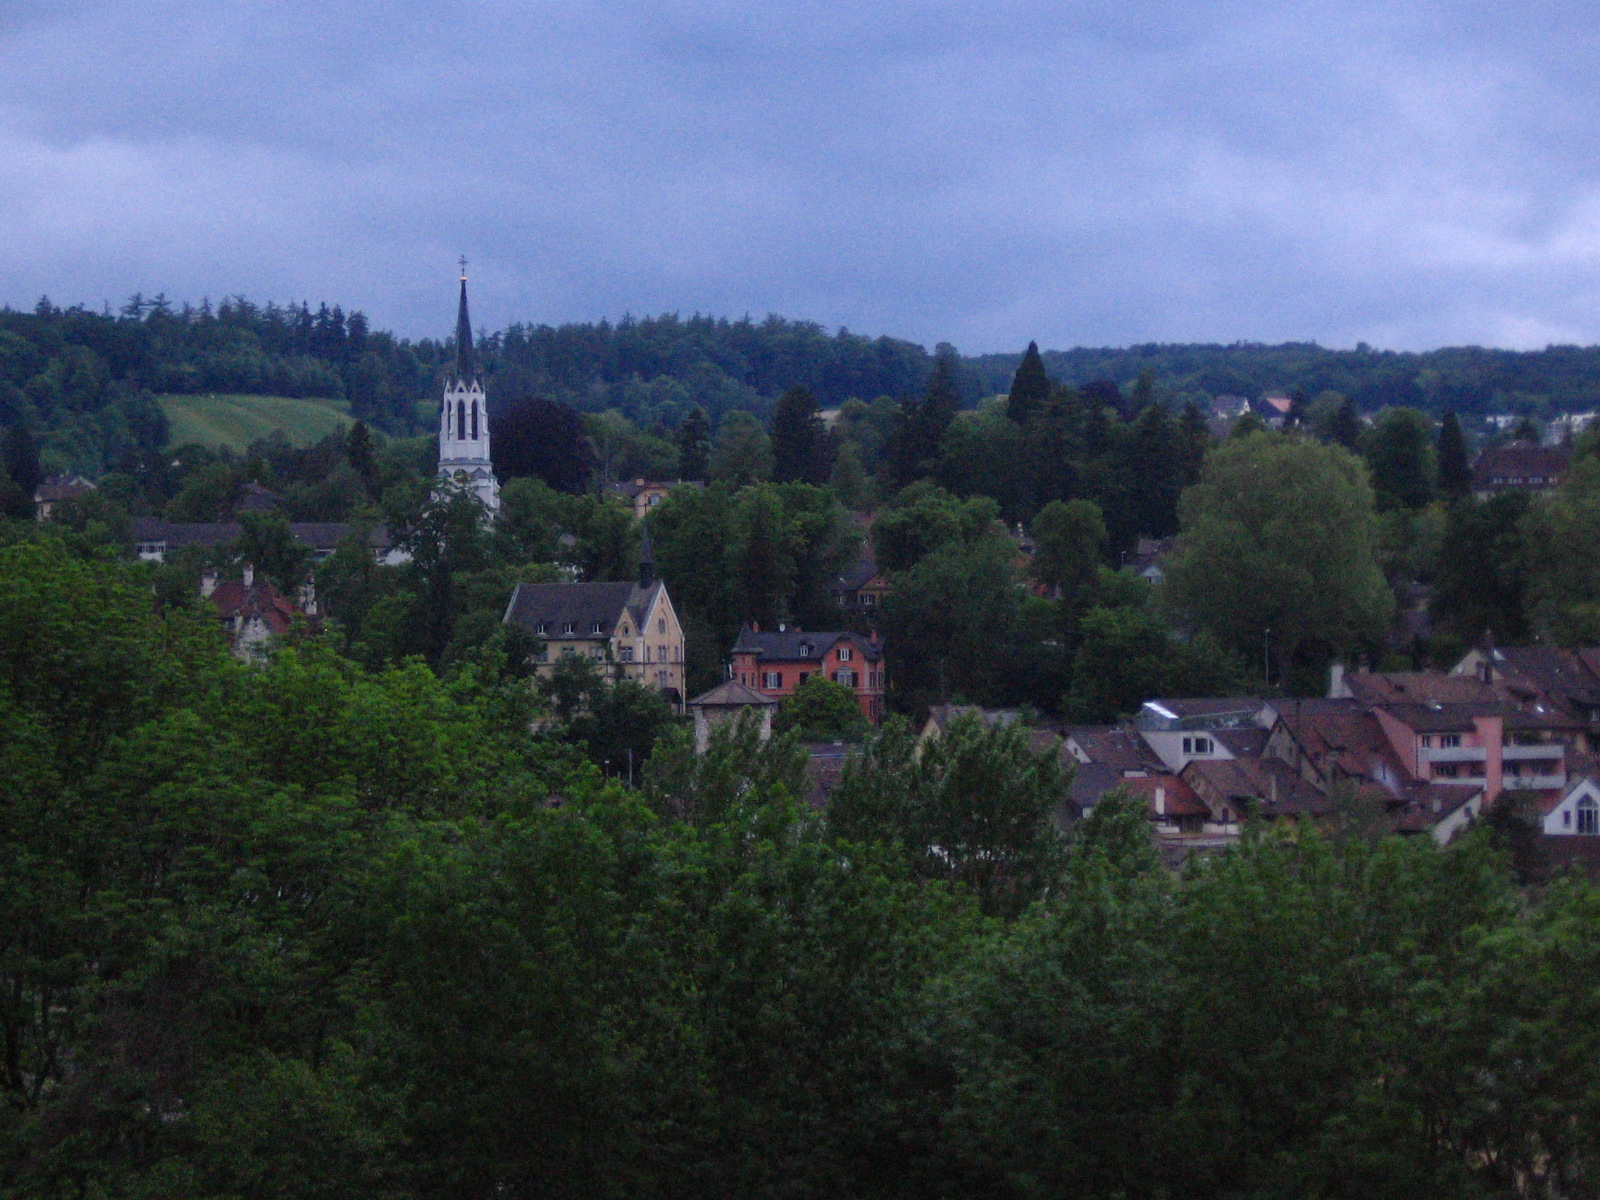 a town with a steeple on top and trees surrounding it